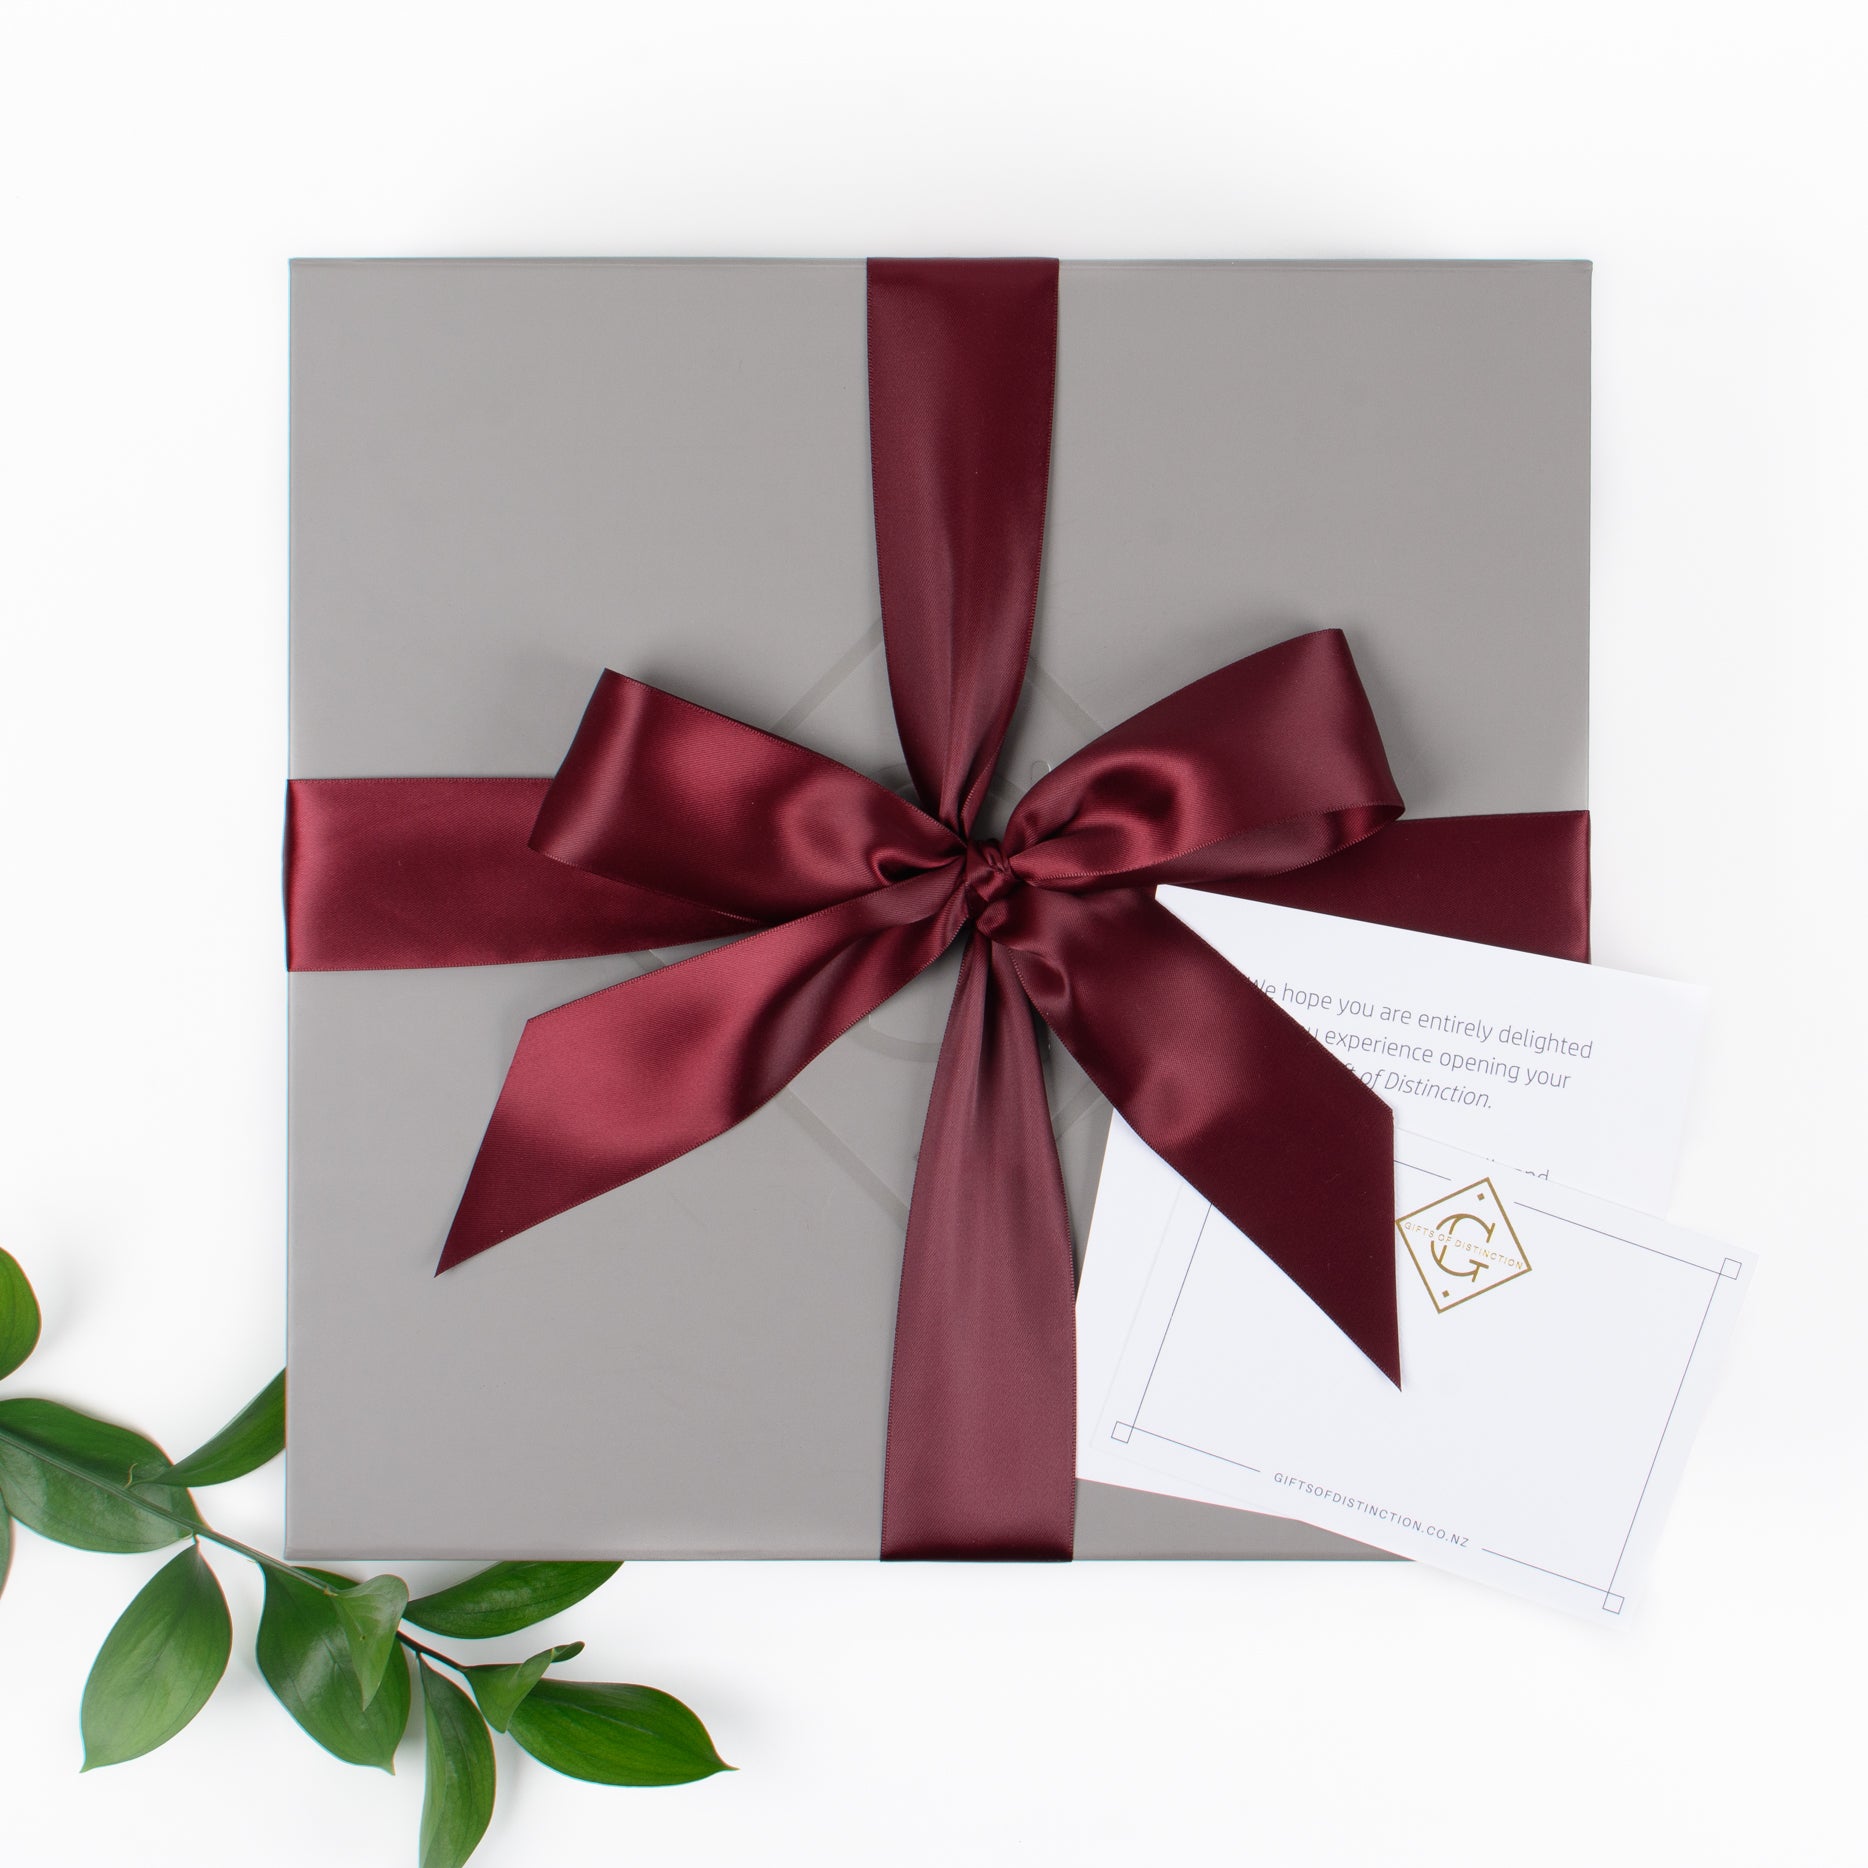 Choice Home - Gift Boxes NZ - Gifts of Distinction